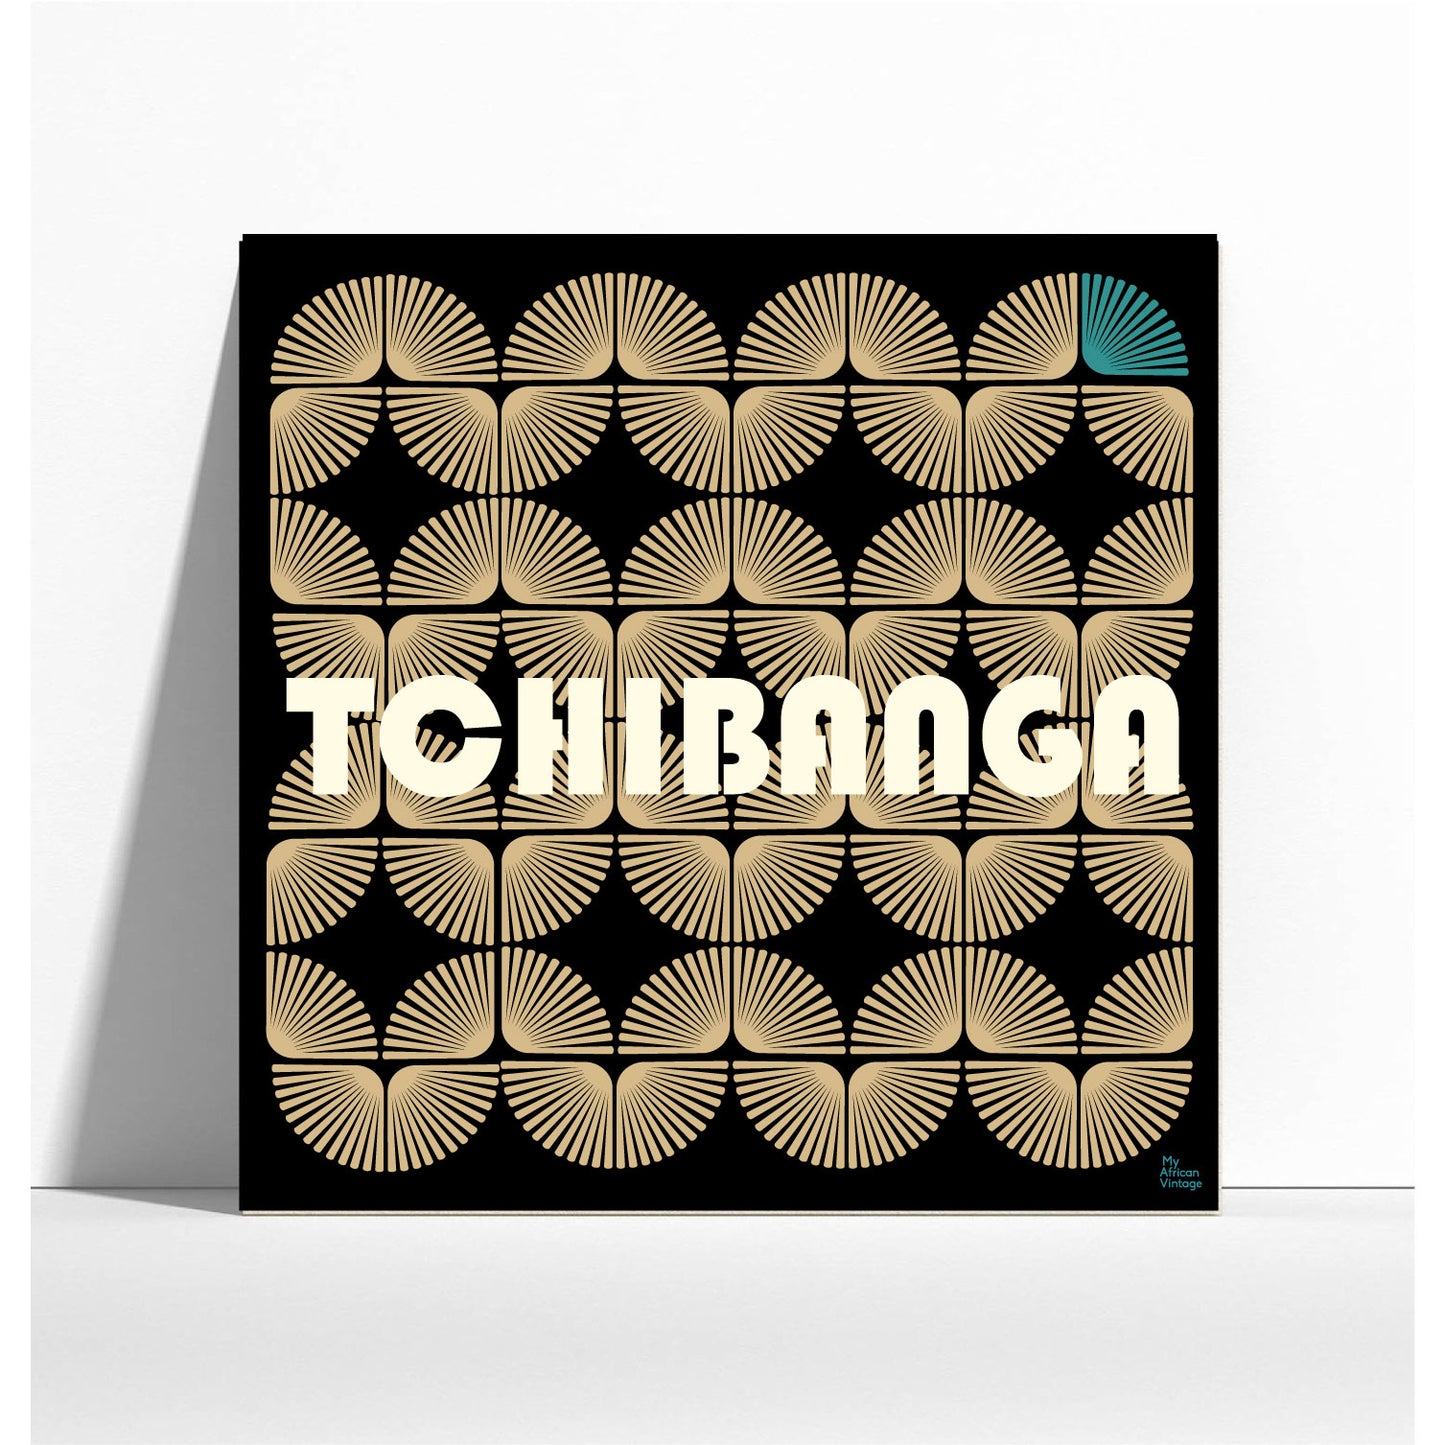 "Tchibanga" retro style poster - "My African Vintage" collection